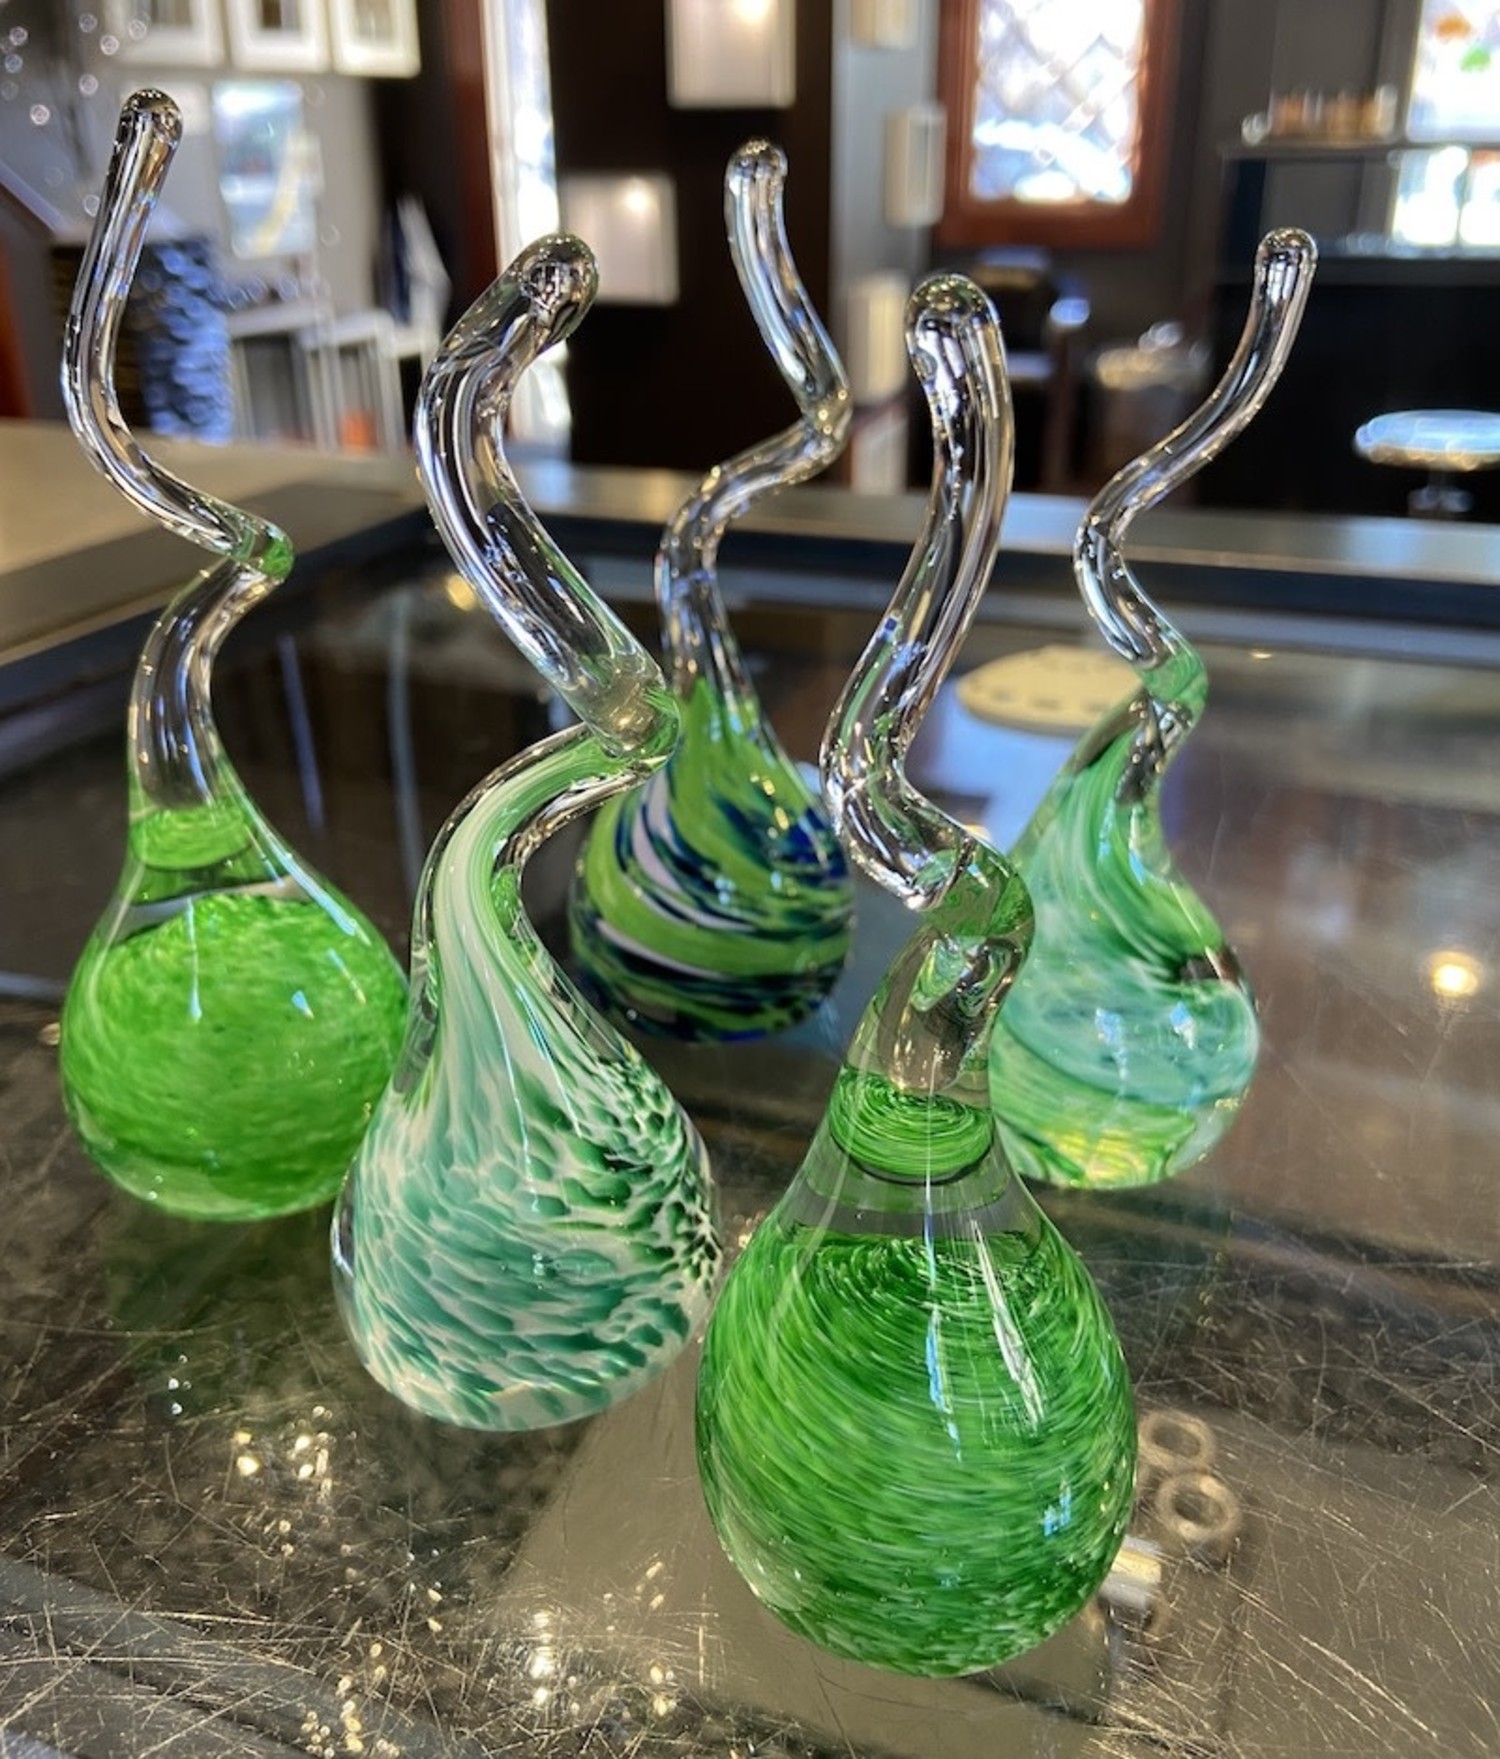 Hand Blown Glass Ring Holder #3 - Unique Jewelry Storage Made in USA -  Northern – Northern Lights Gallery